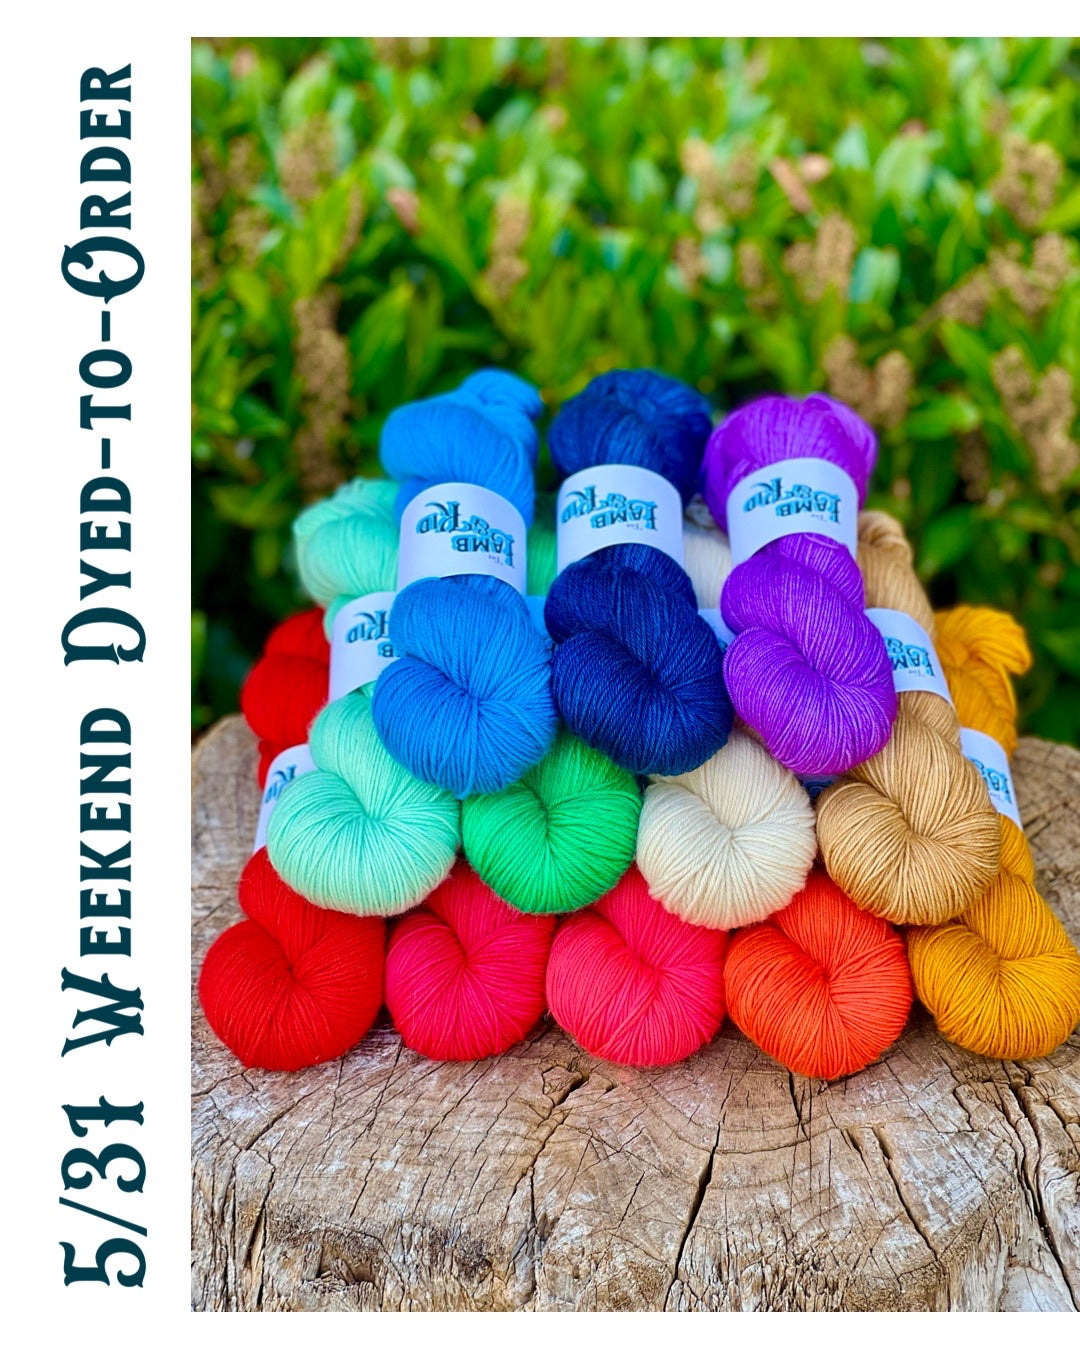 5/31 Dyed-to-Order